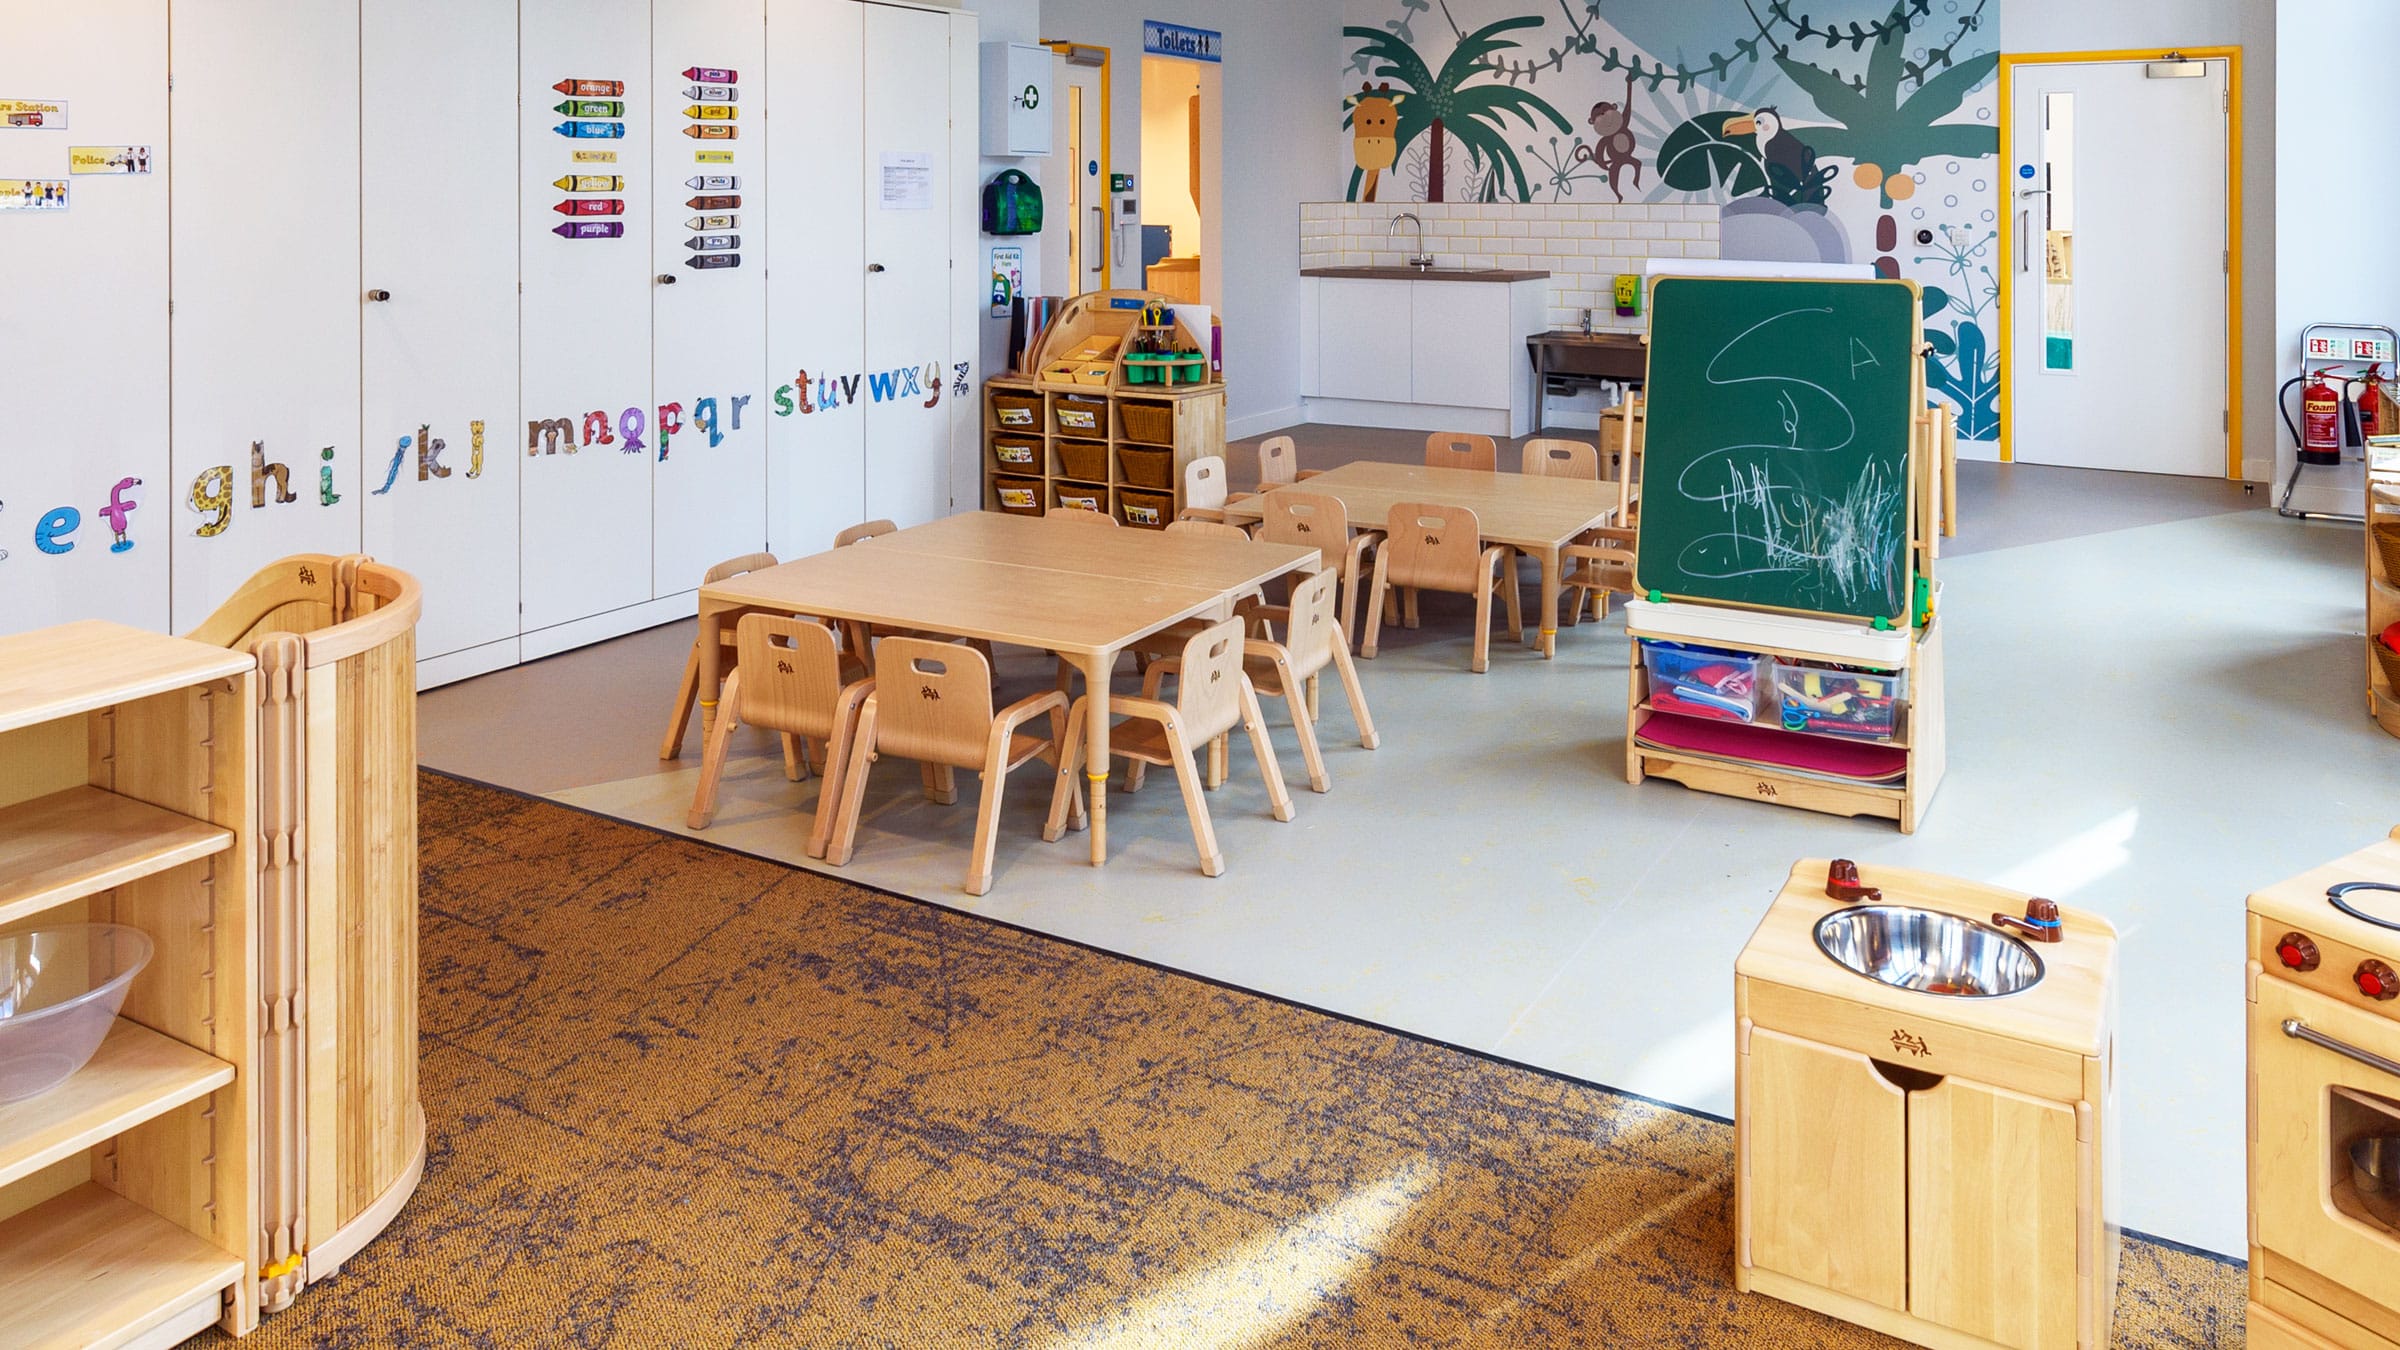 Childrens daycare interior wooden tables and chalkboard